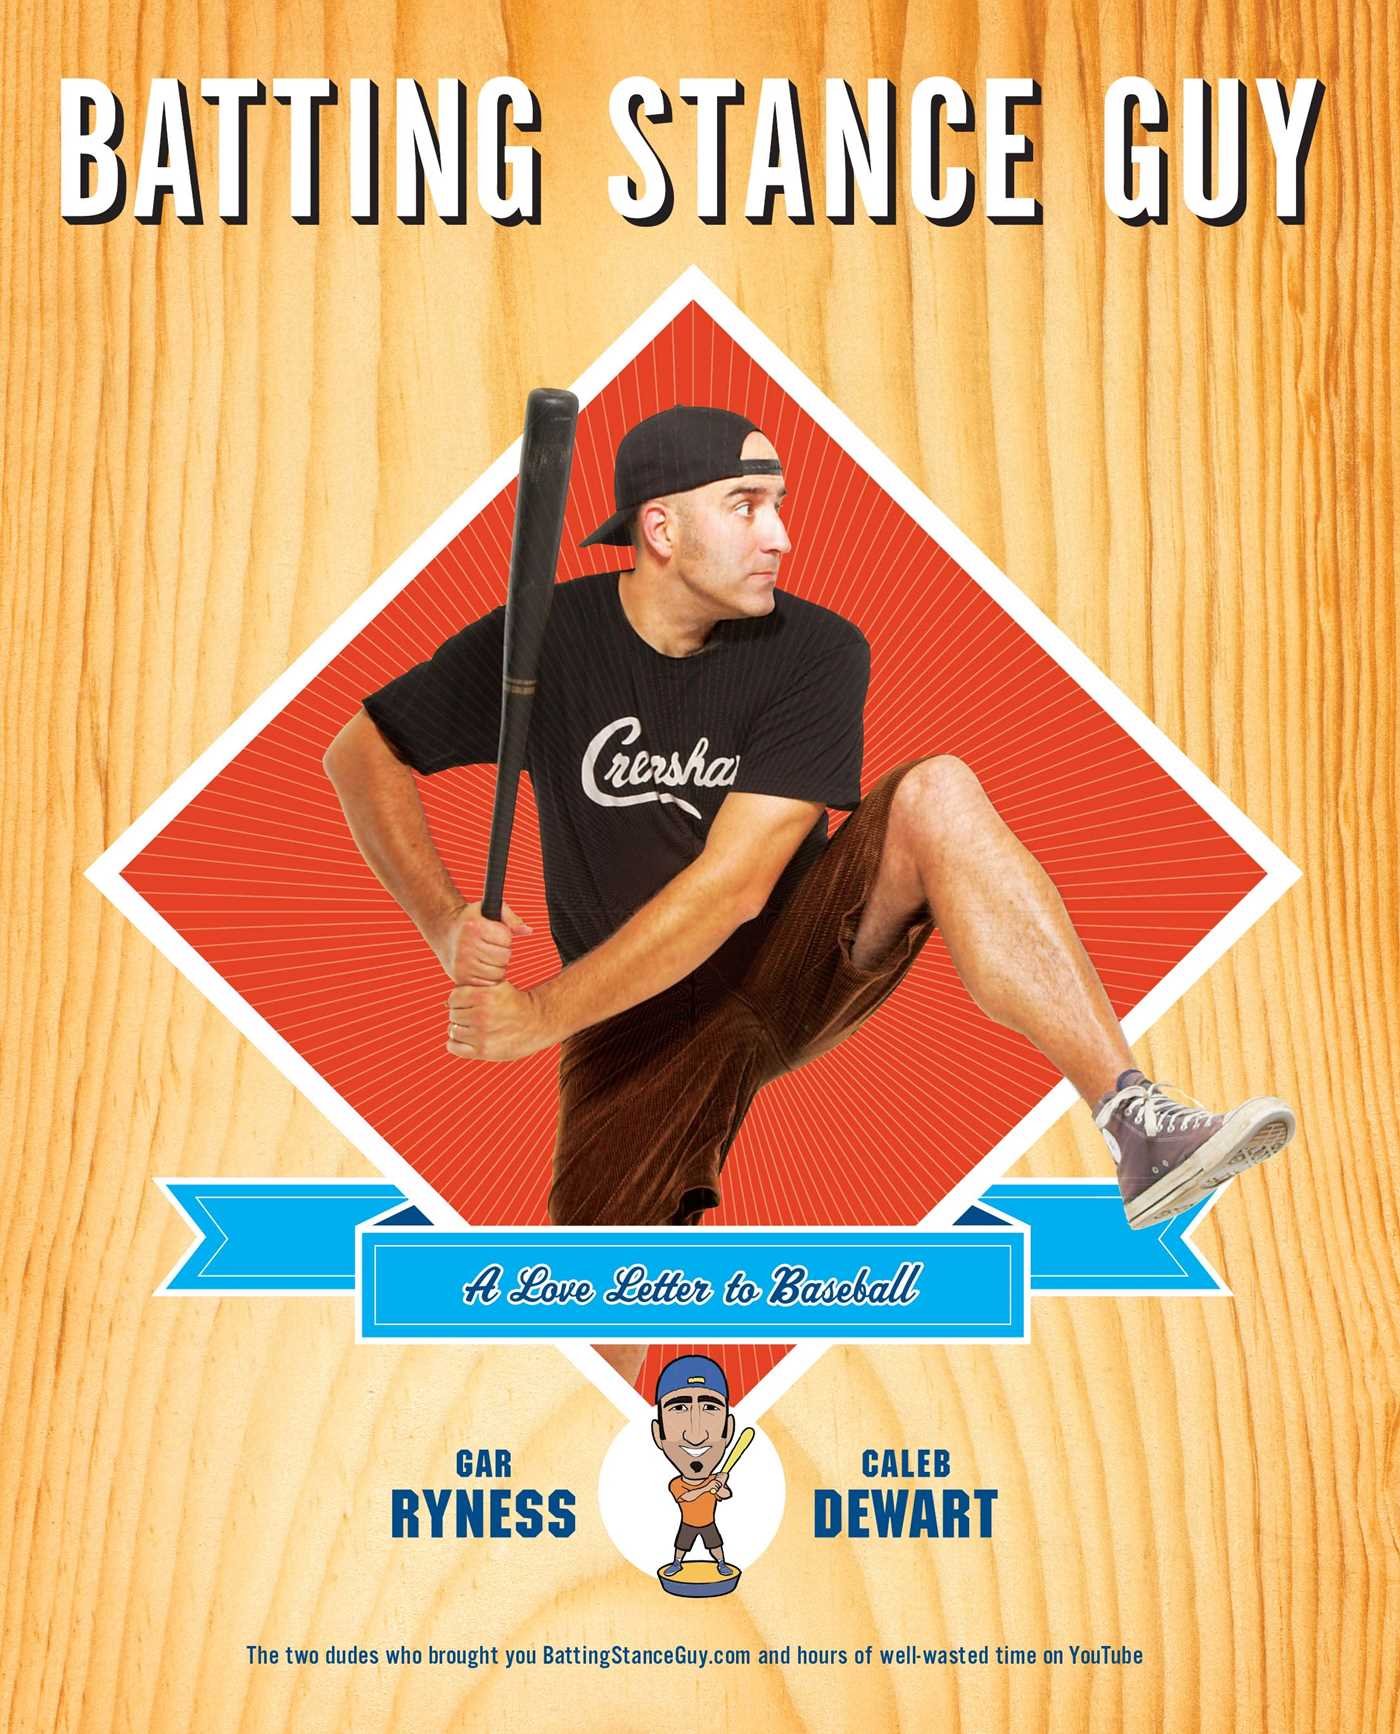 The Super 70s Sports Podcast #14: Gar Ryness “The Batting Stance Guy”